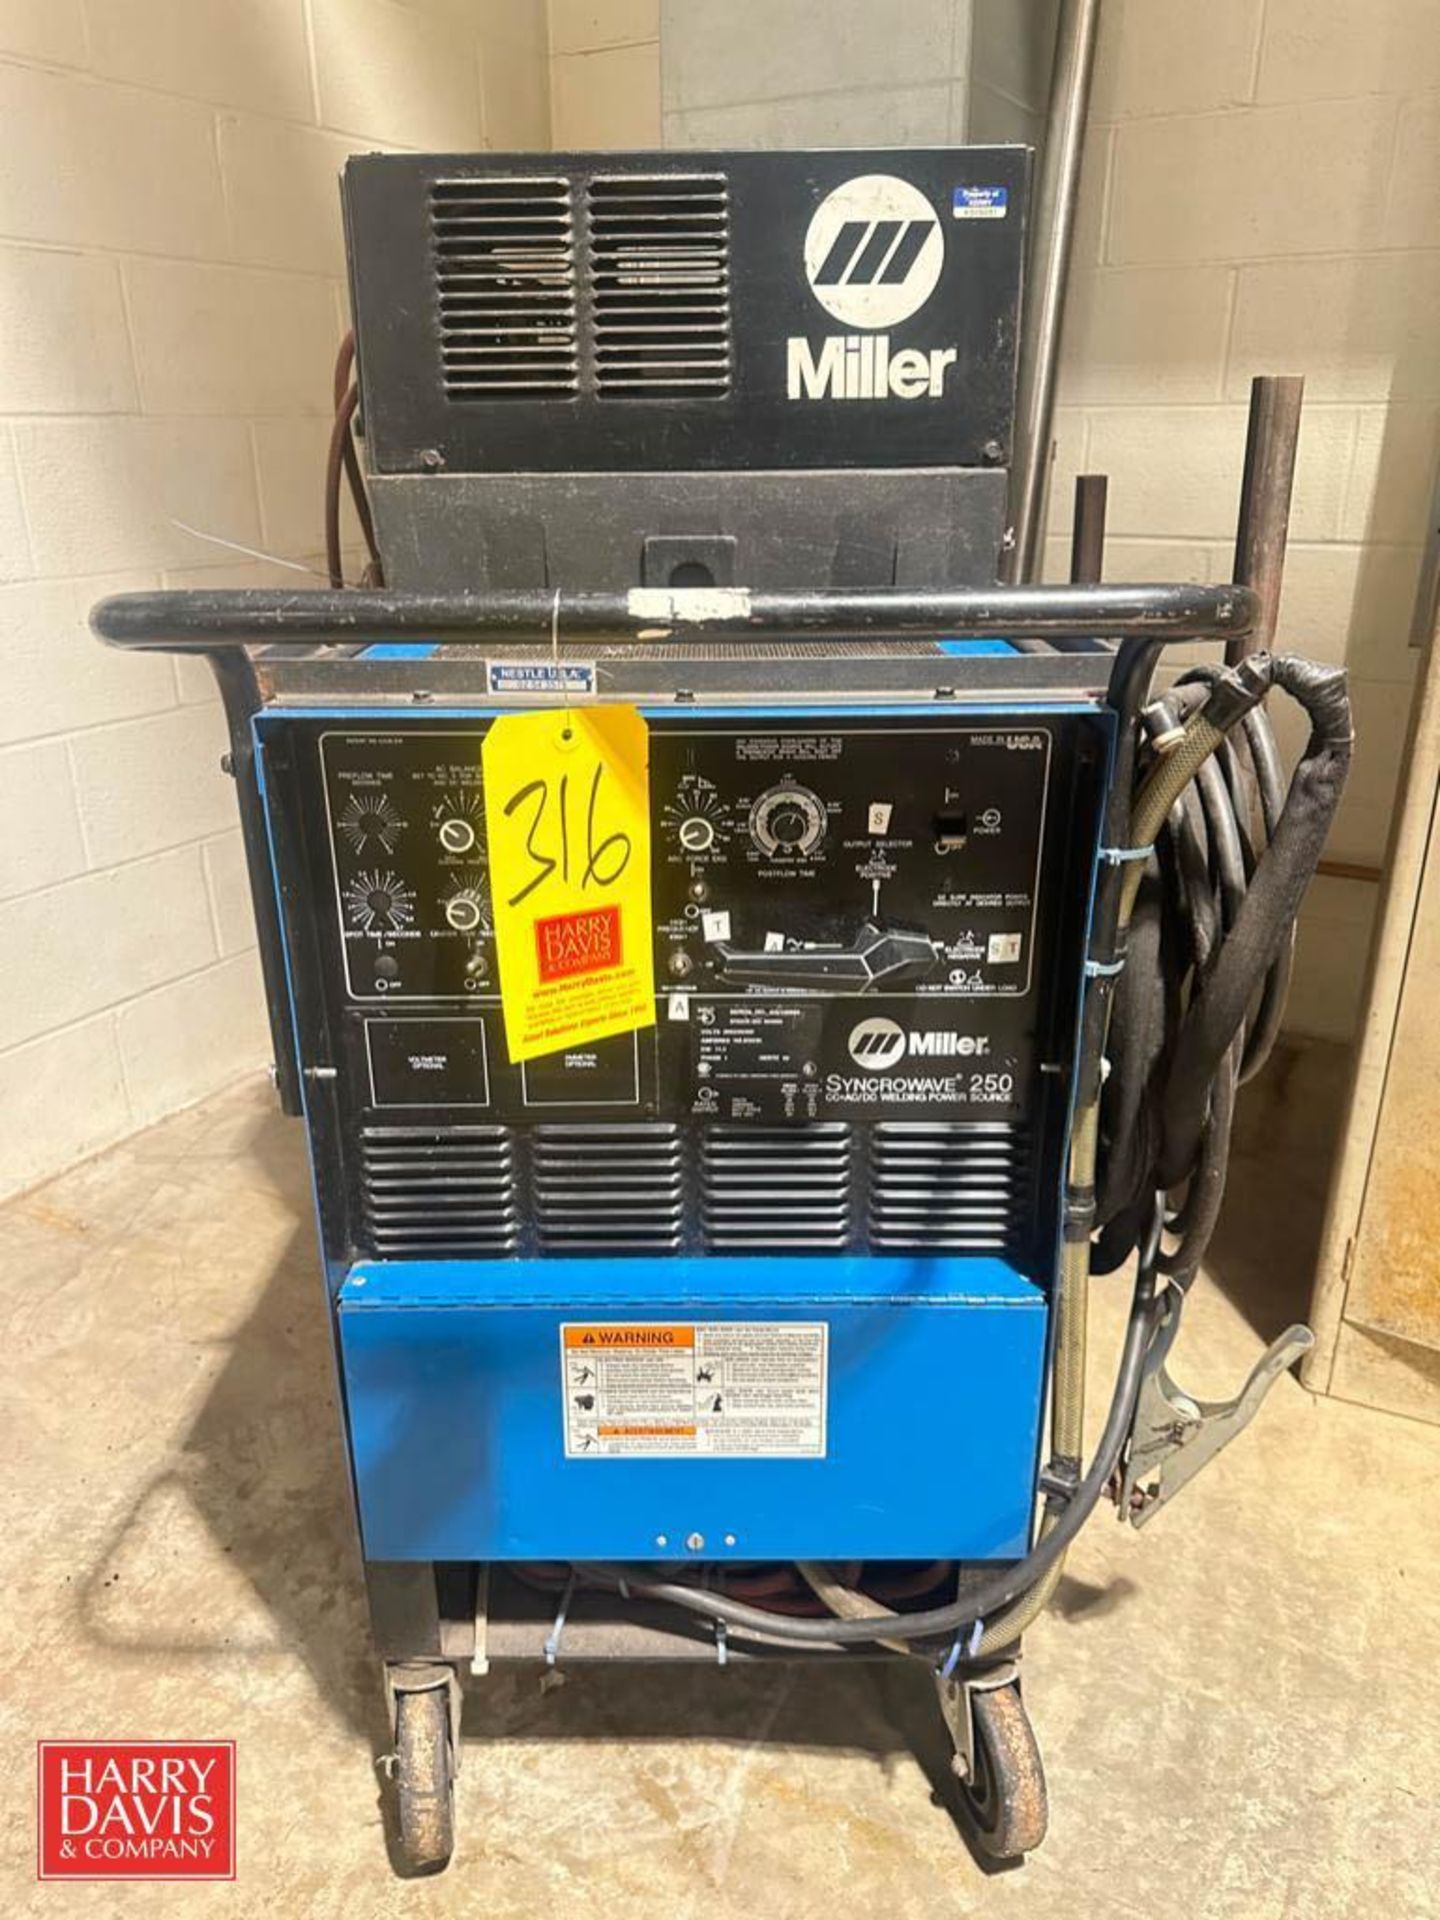 Miller Syncrowave 250 Portable Welder, S/N: KG204701 with Coolmate 3 Recirculating Coolant System